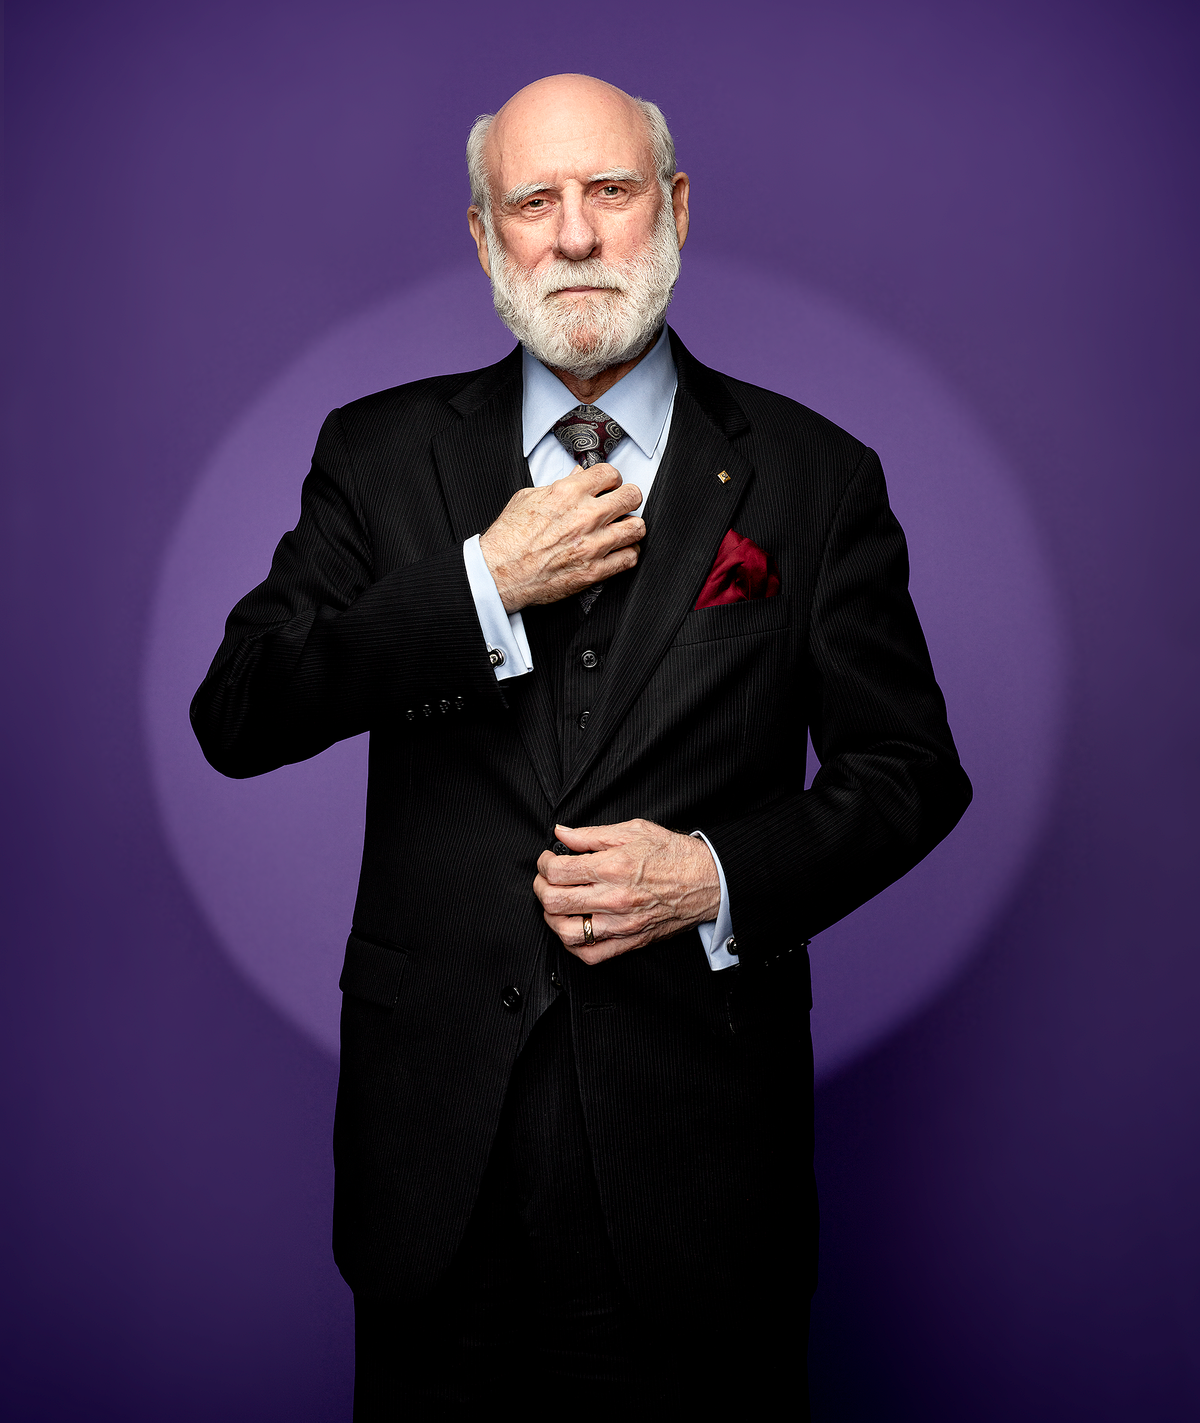 A color photo of a man with a beard in an elegant three-piece suit.